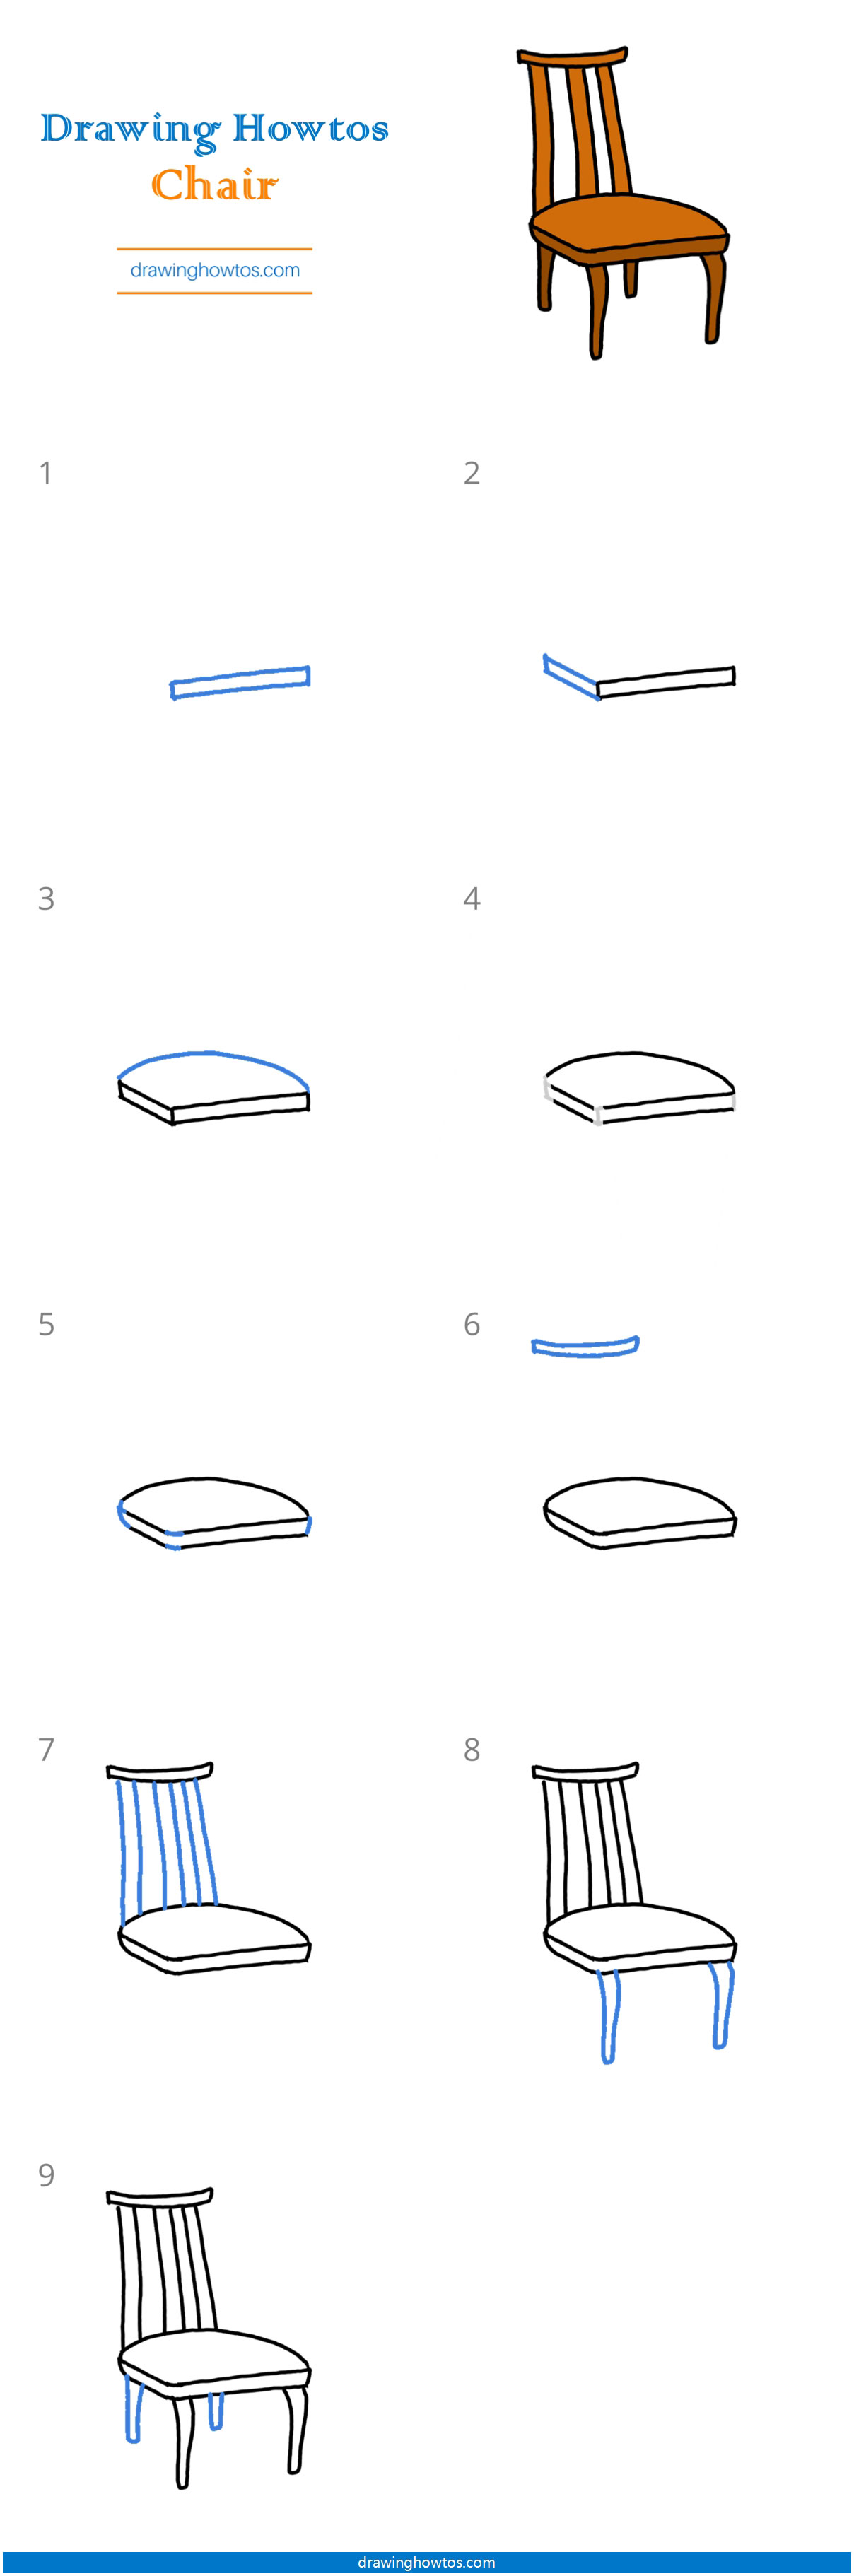 How to Draw a Chair Step by Step